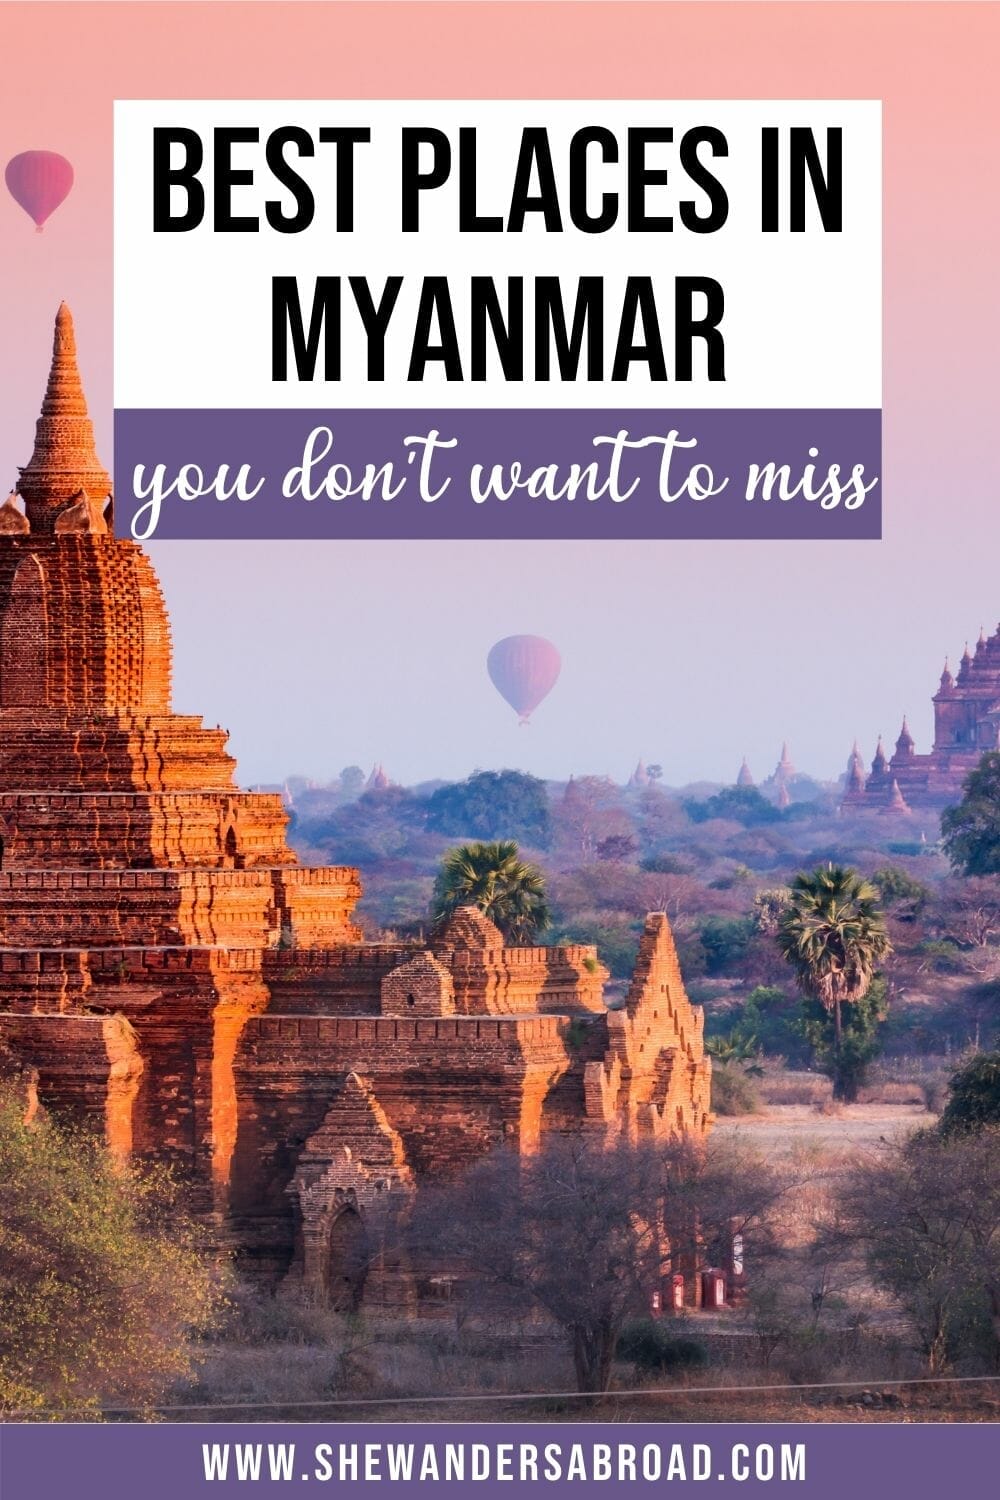 The Ultimate 10 Day Myanmar Itinerary for First Timers